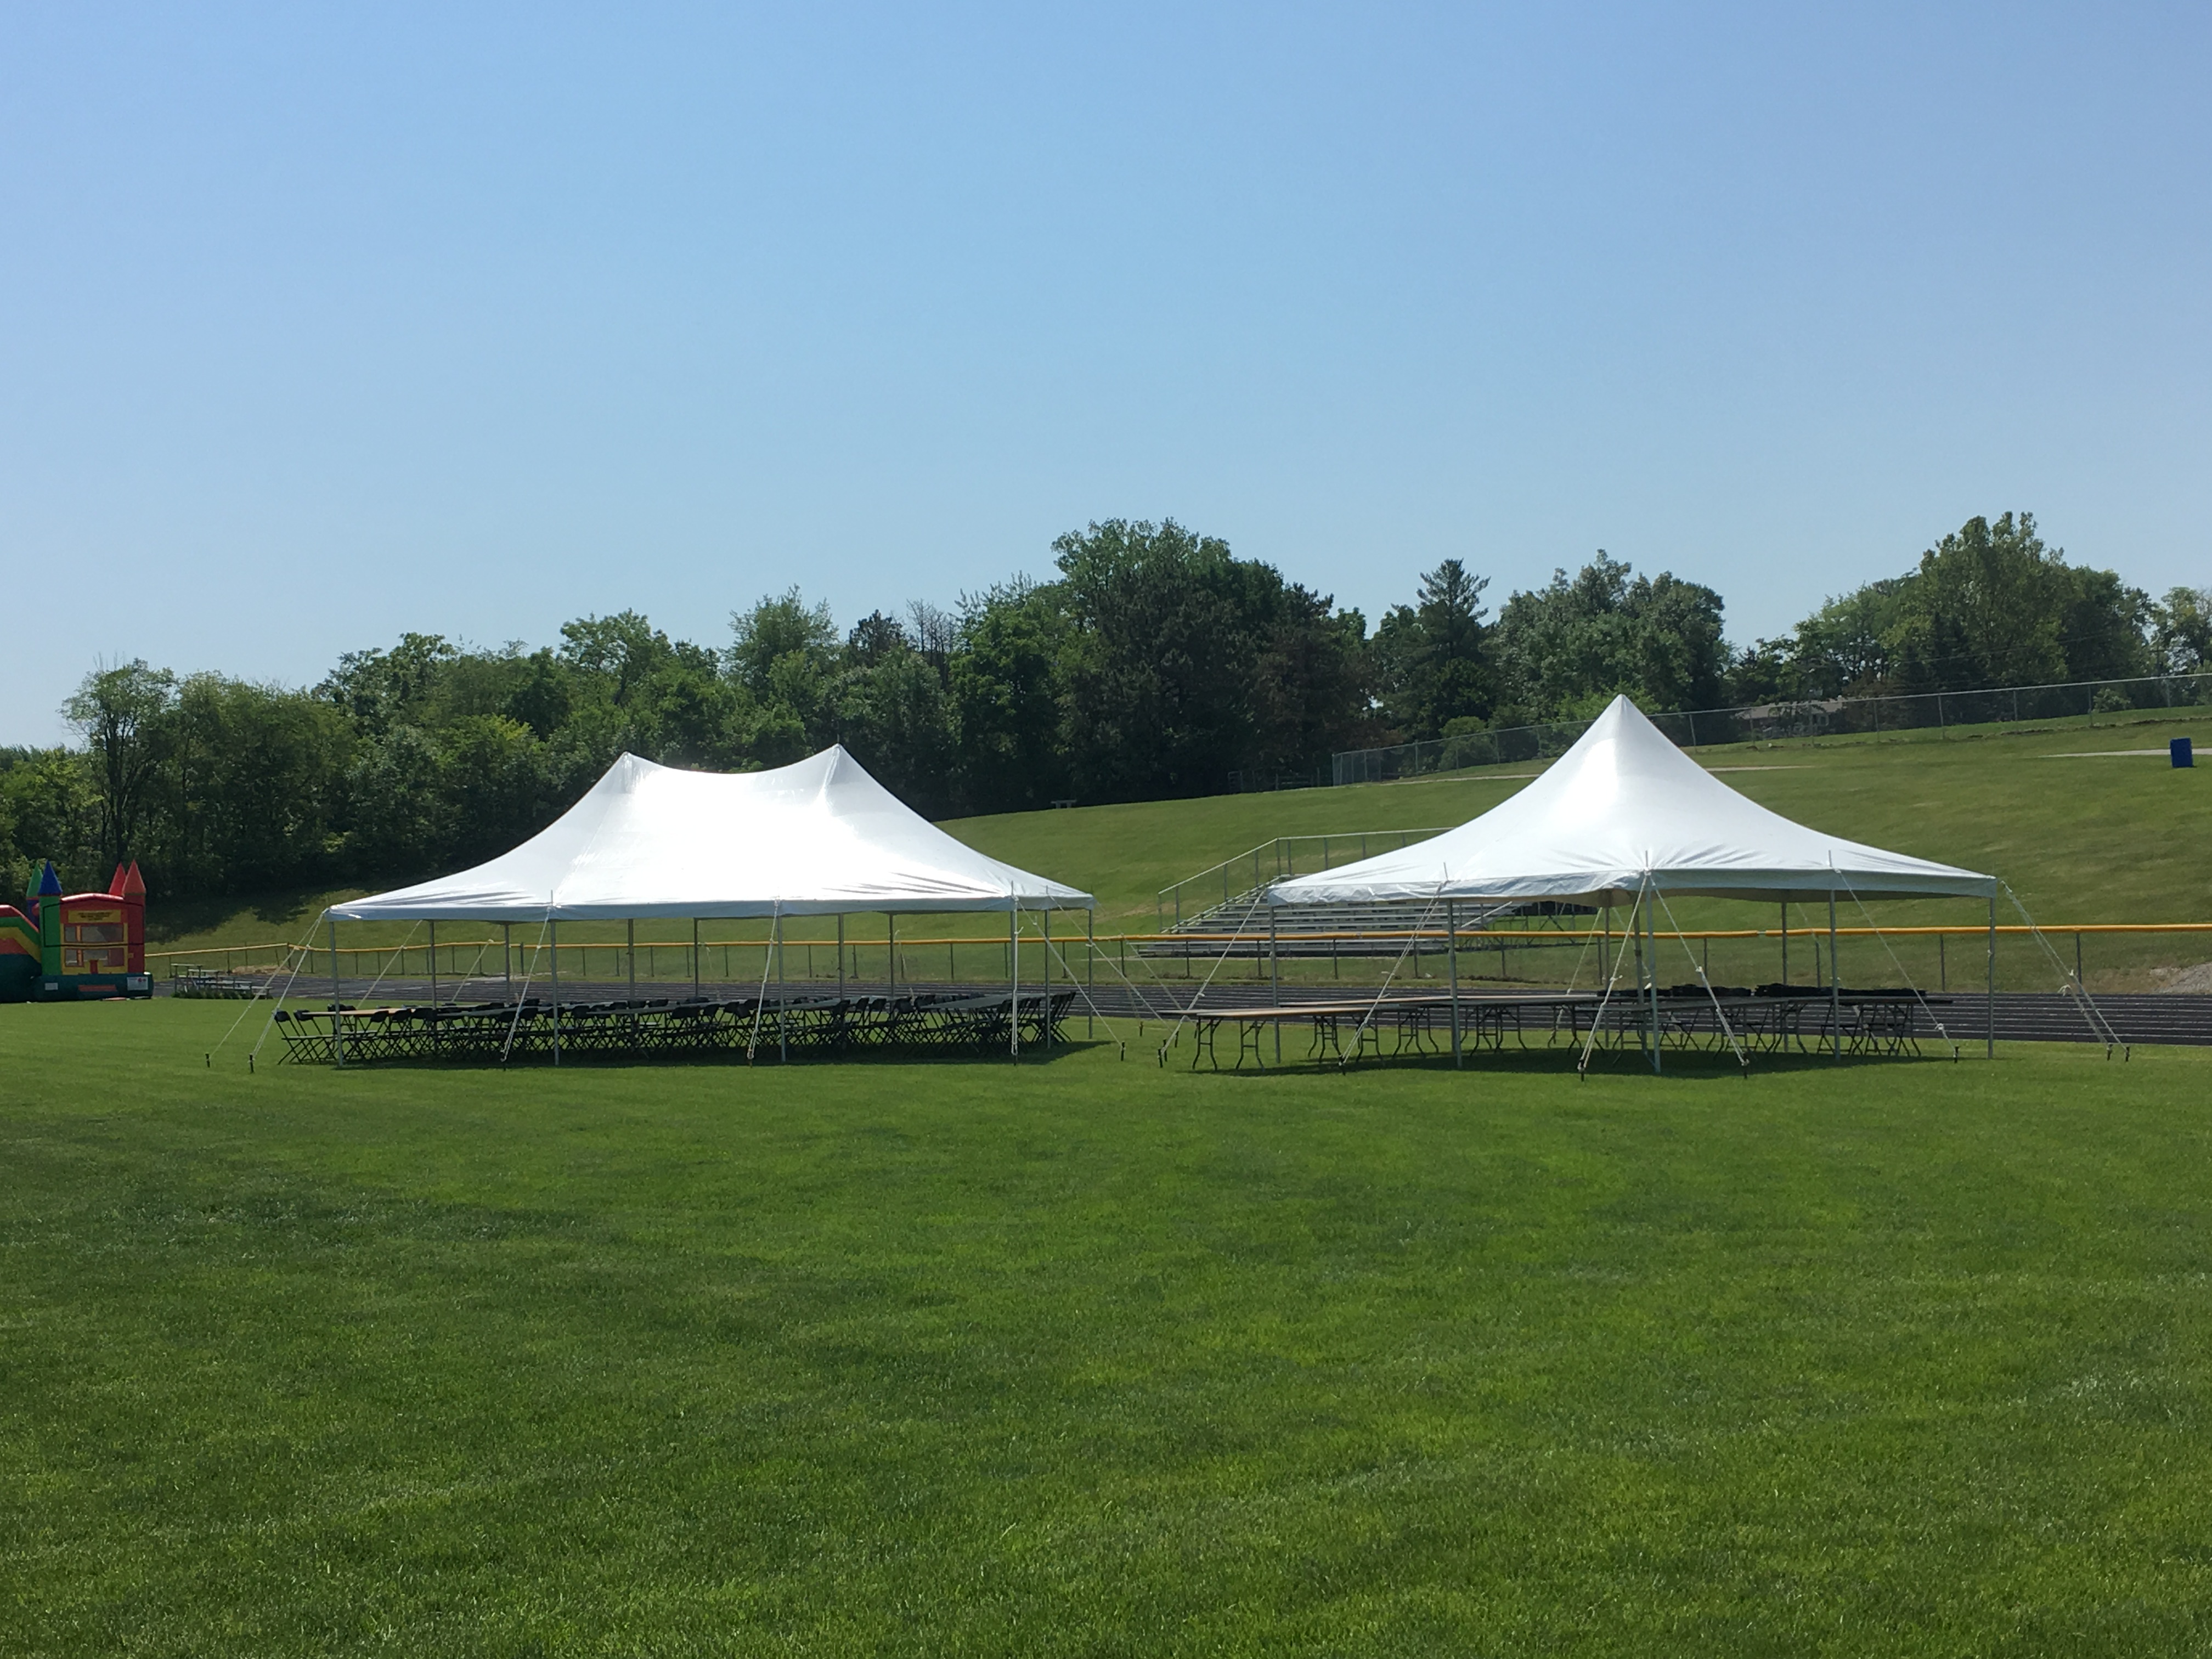 20'x30' rope and pole tent (middle) and 20'x20' rope and pole tent (right)